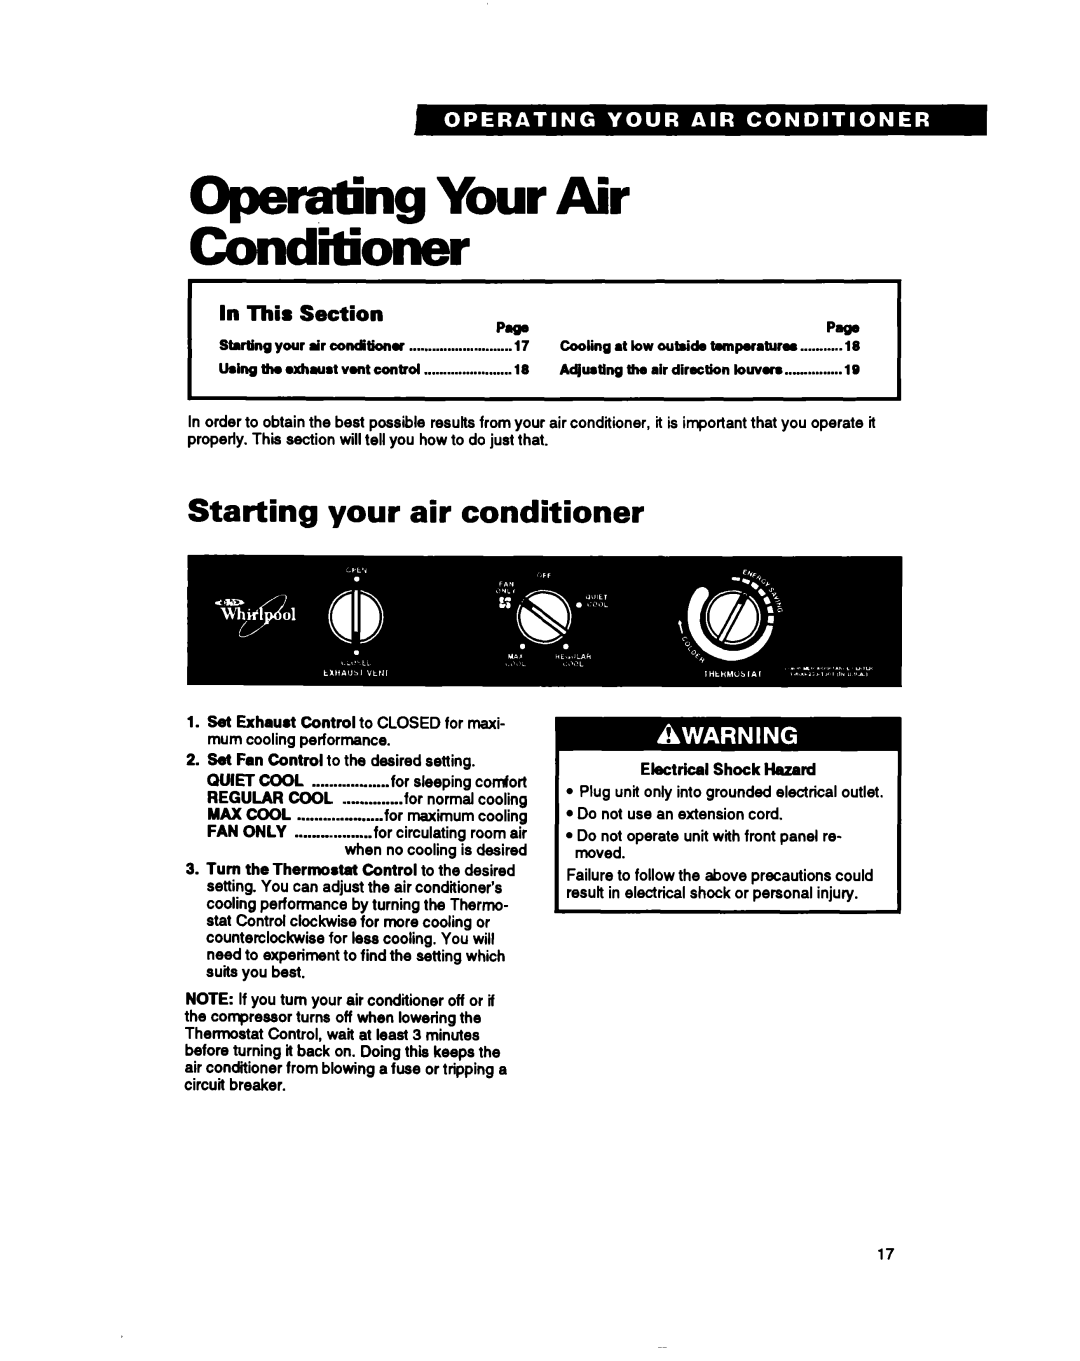 Whirlpool ACSIOZ ACS520 warranty Operating Your Air Conditioner, Starting your air conditioner, In This Section PmPW 